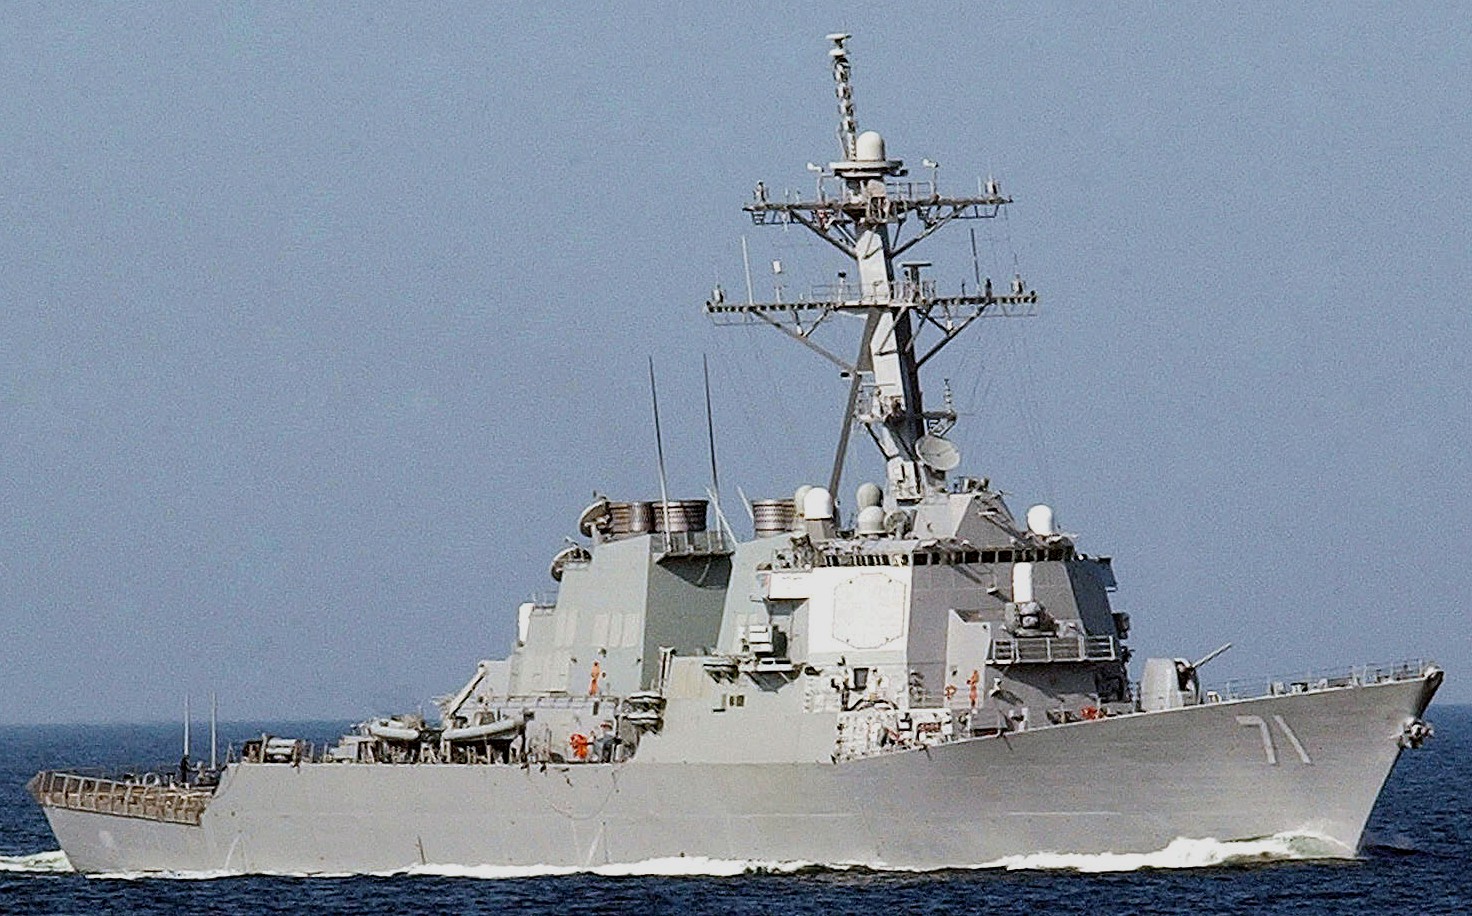 ddg-71 uss ross guided missile destroyer arleigh burke class aegis bmd 101 baltic sea